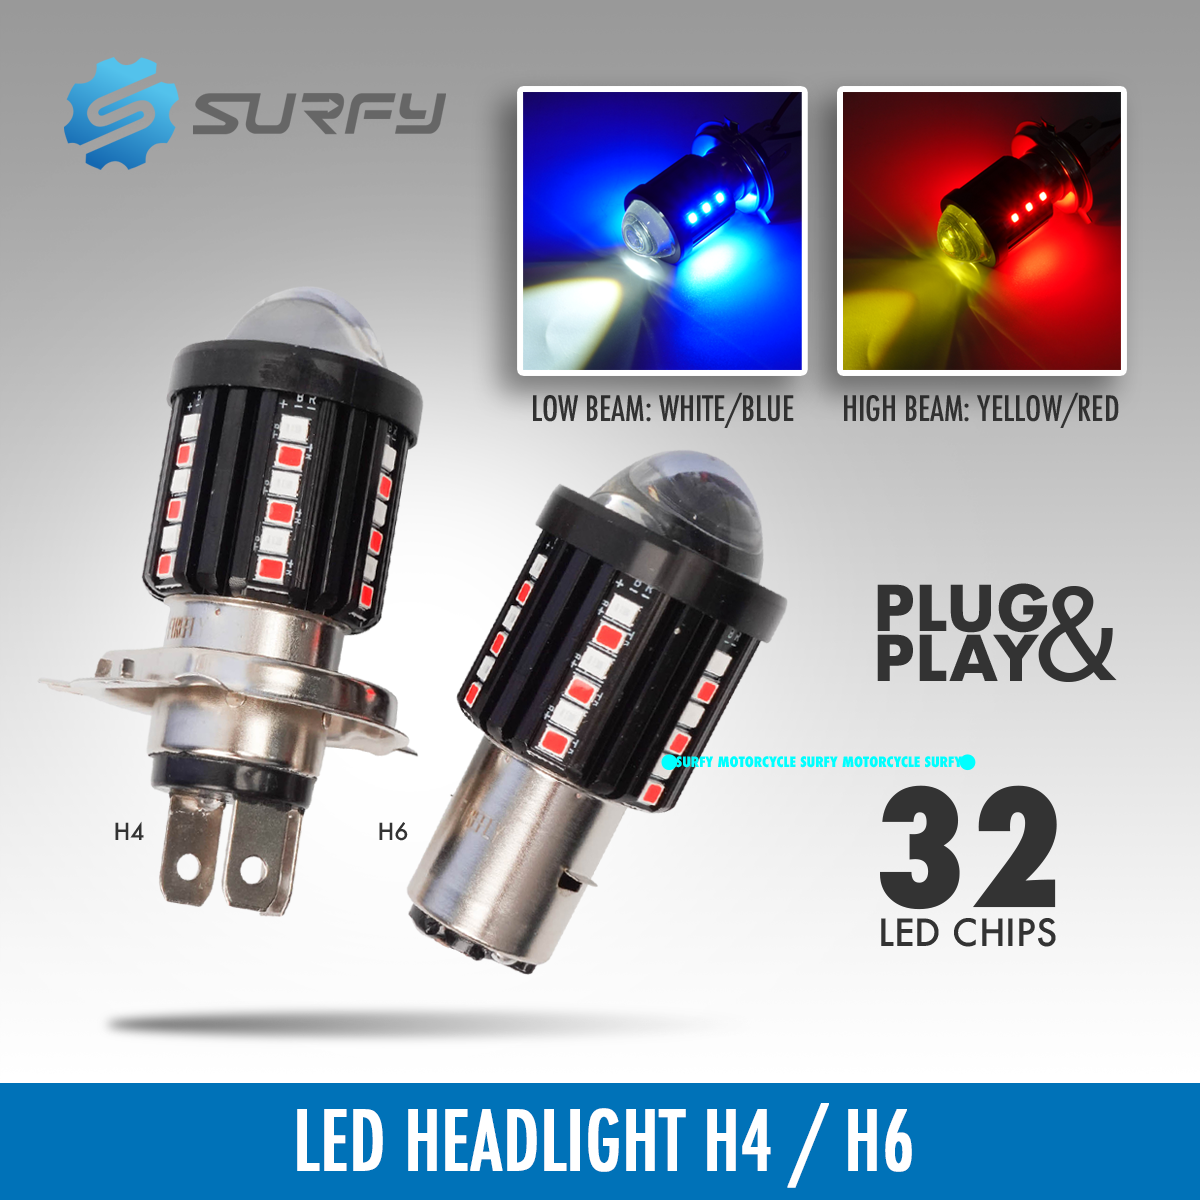 Firefly Dual Bulb Headlight with LED Chips and Parklight